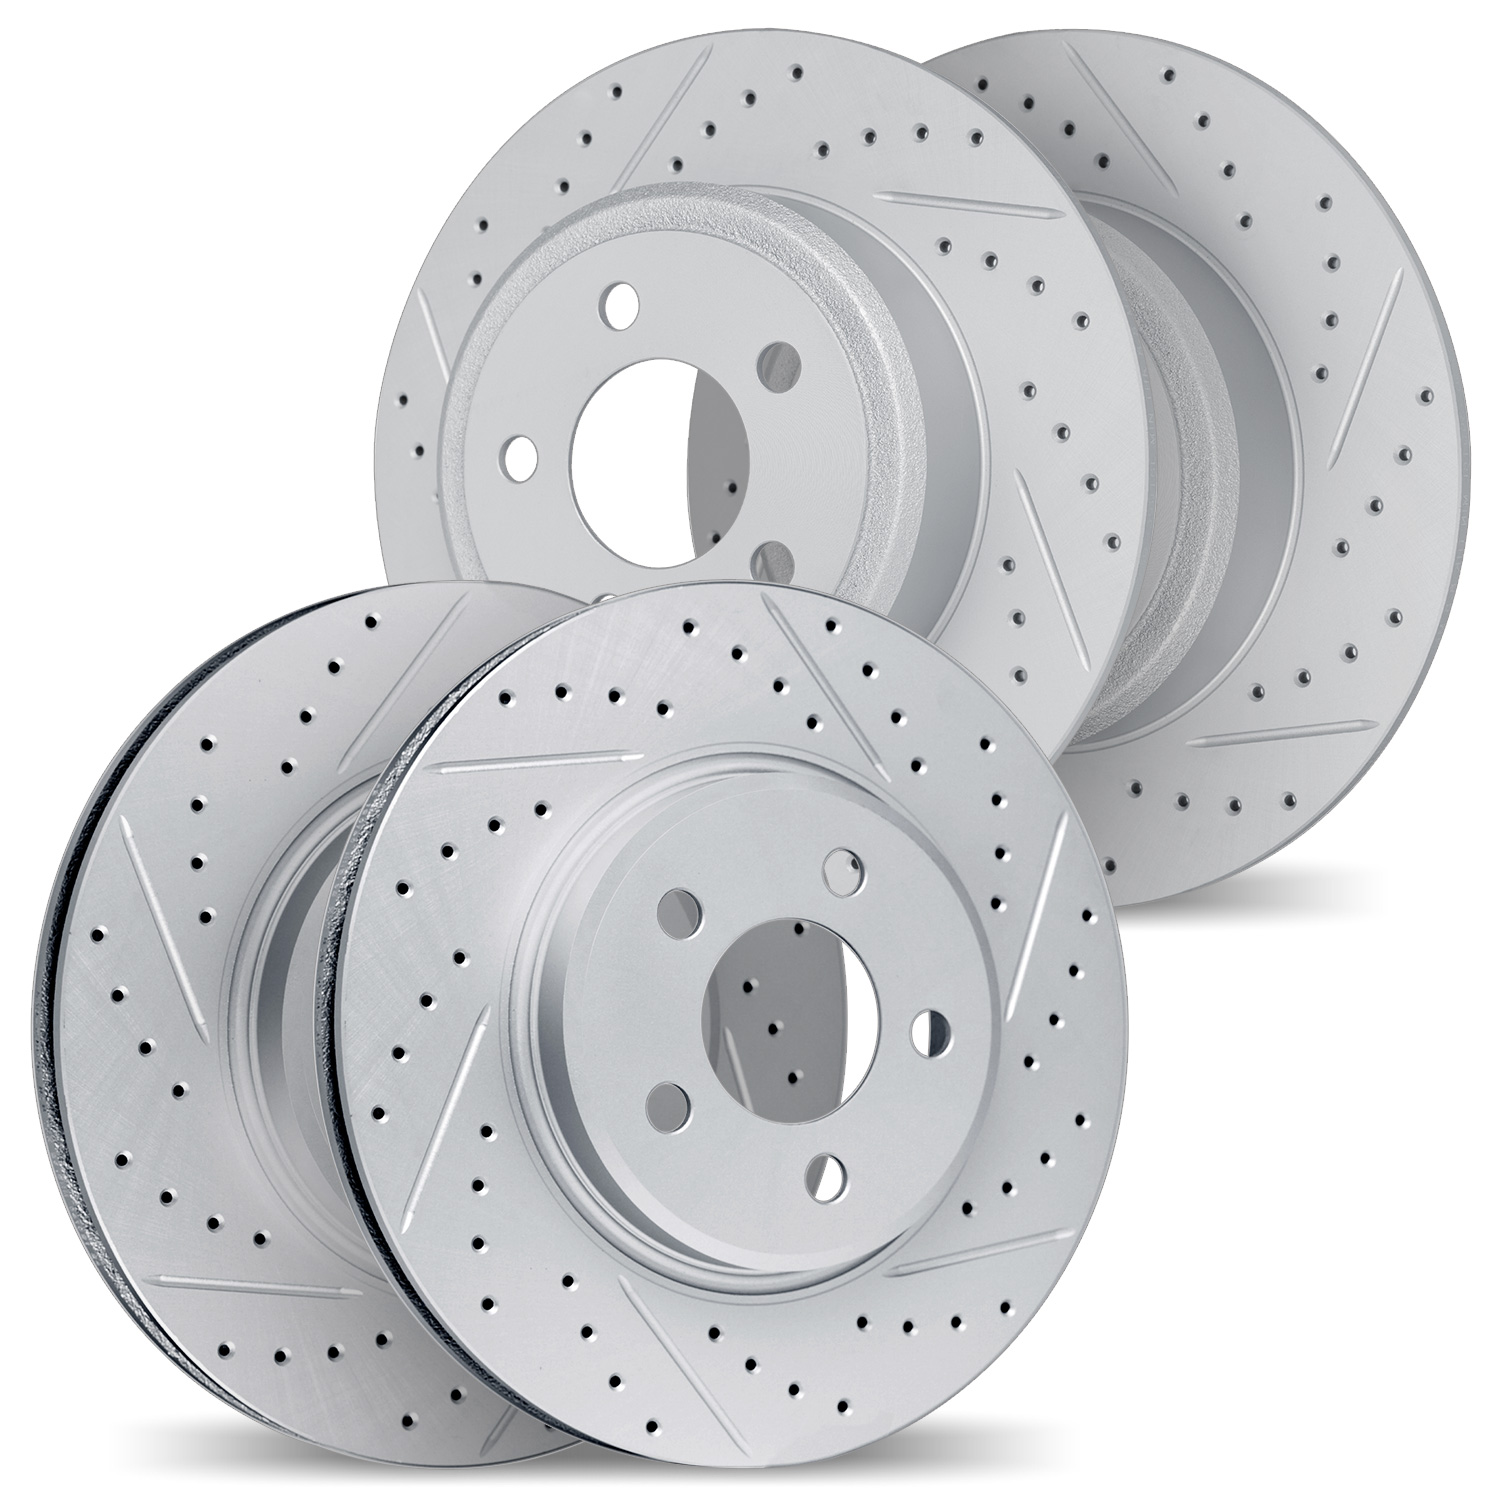 2004-03065 Geoperformance Drilled/Slotted Brake Rotors, 2015-2021 Kia/Hyundai/Genesis, Position: Front and Rear